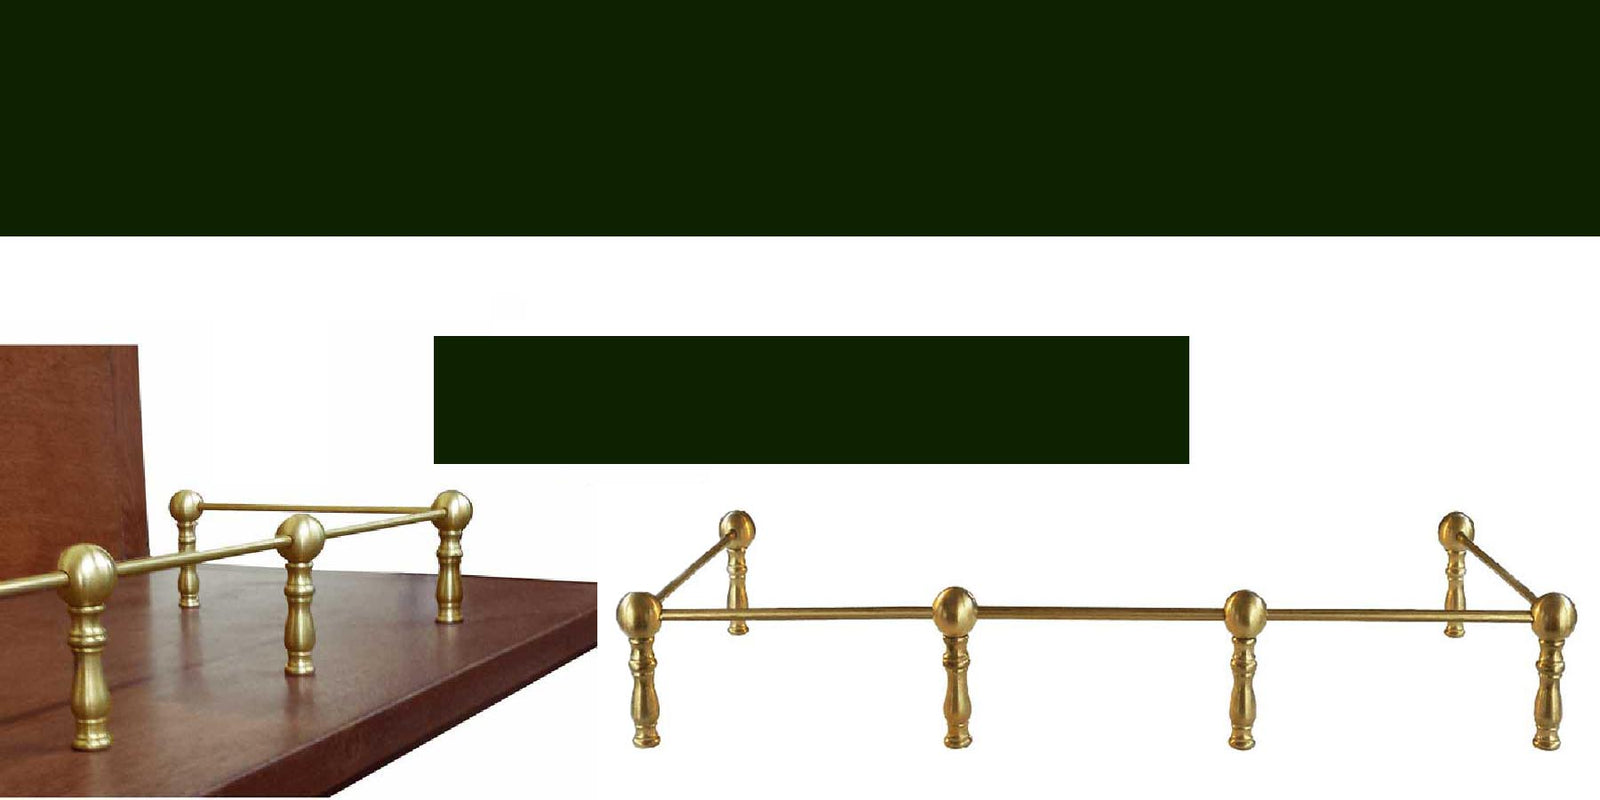 Vintage Shelf Railing is a decorative brass rail that can be customized to various layouts